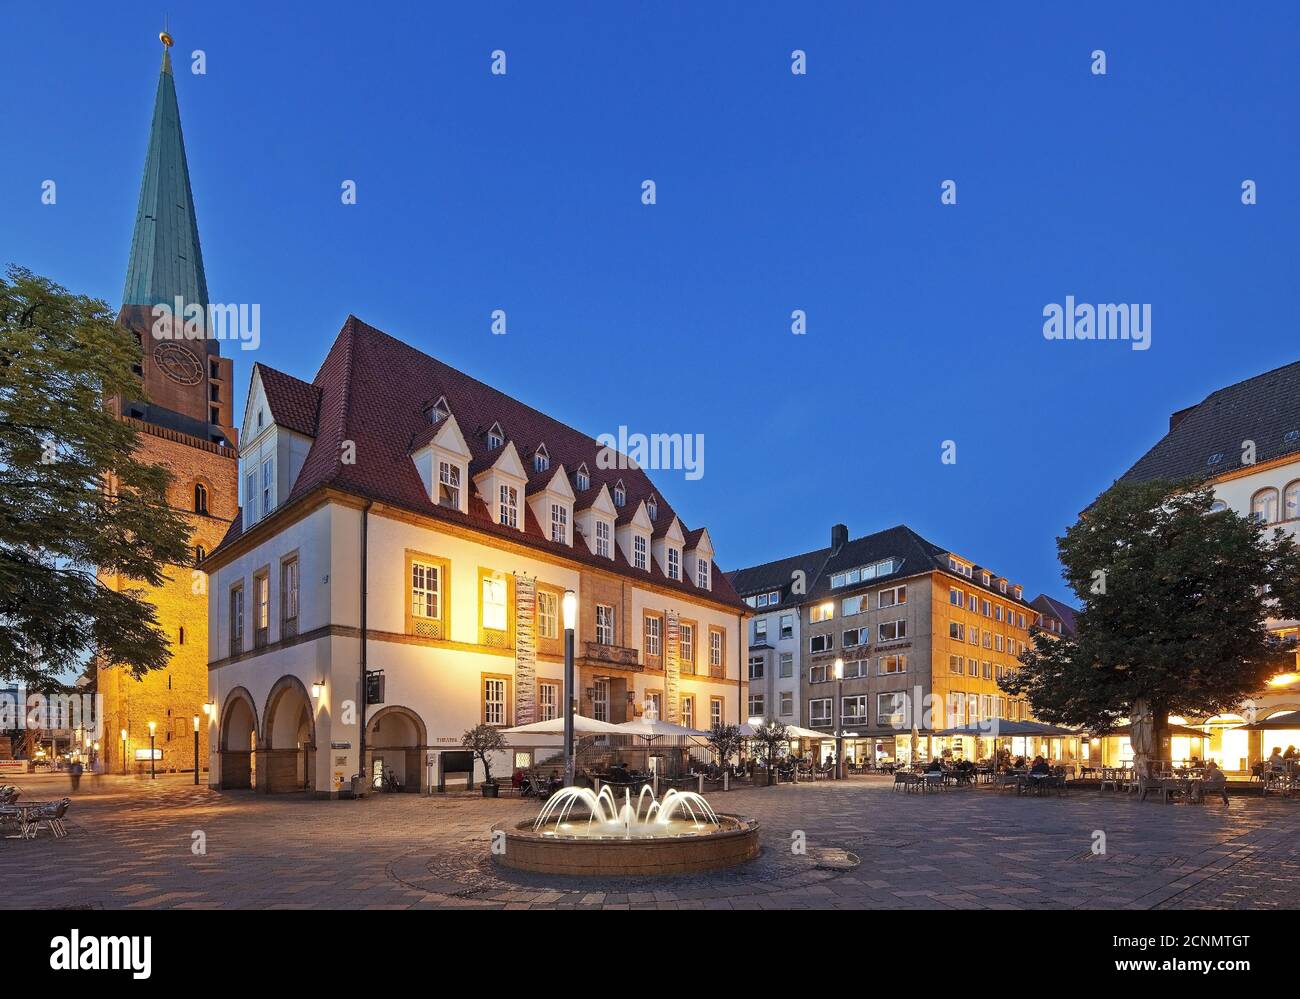 Old market with old town Nicolai church and theater TAM in the evening, Bielefeld, Germany, Europe Stock Photo